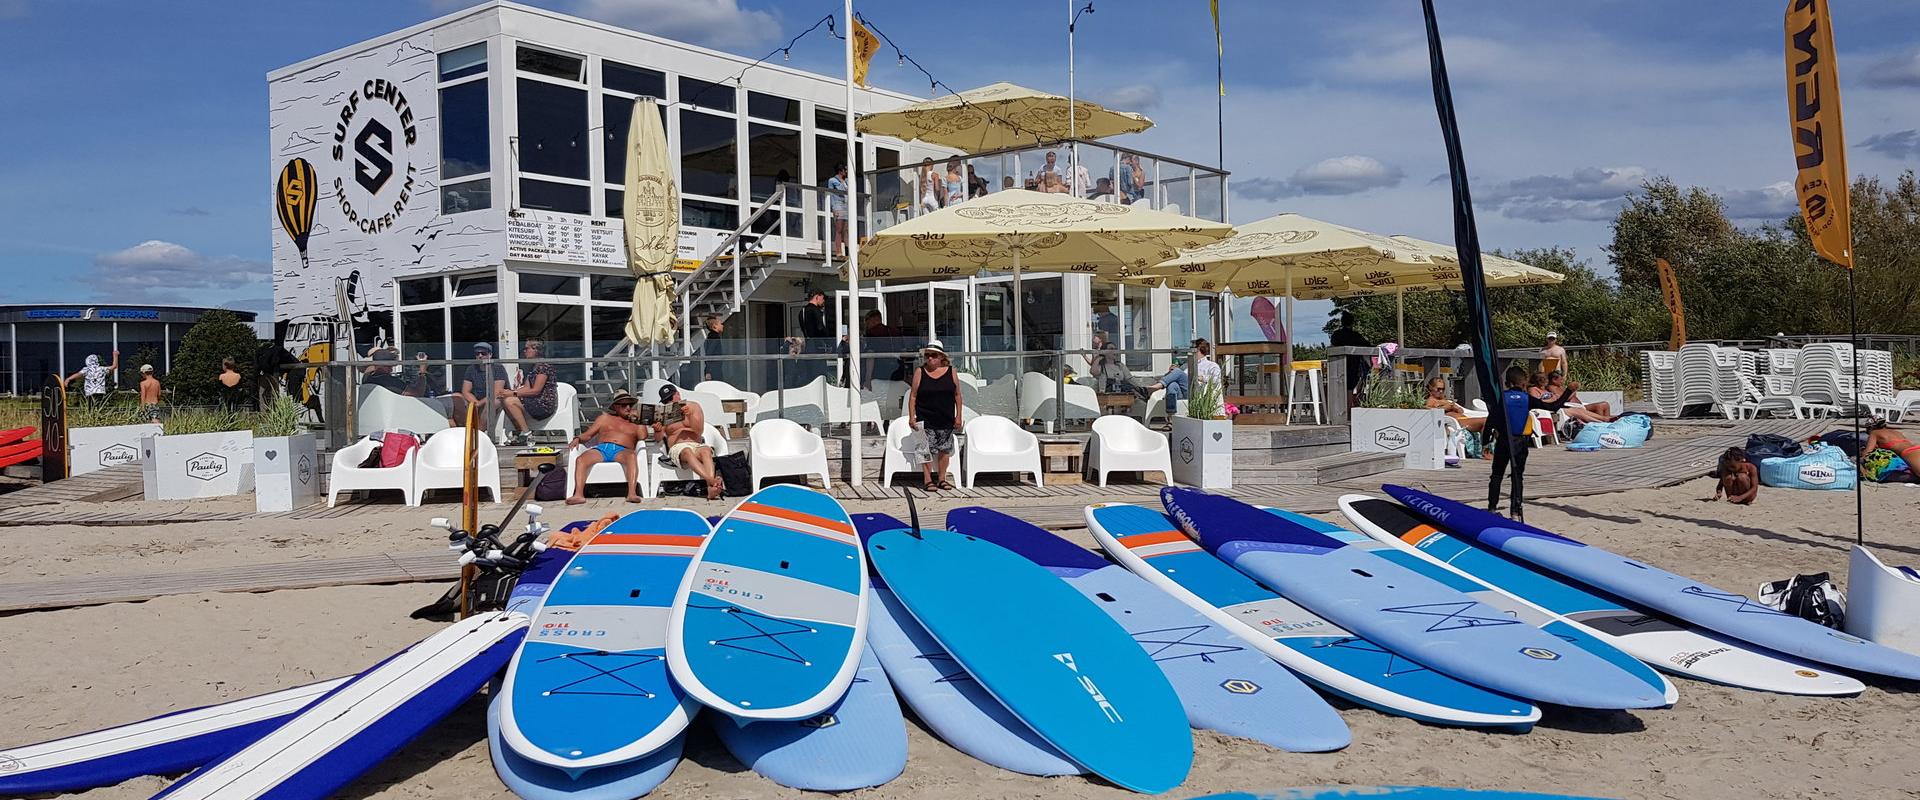 You will find Surf Centre at the beach by the yellow flags